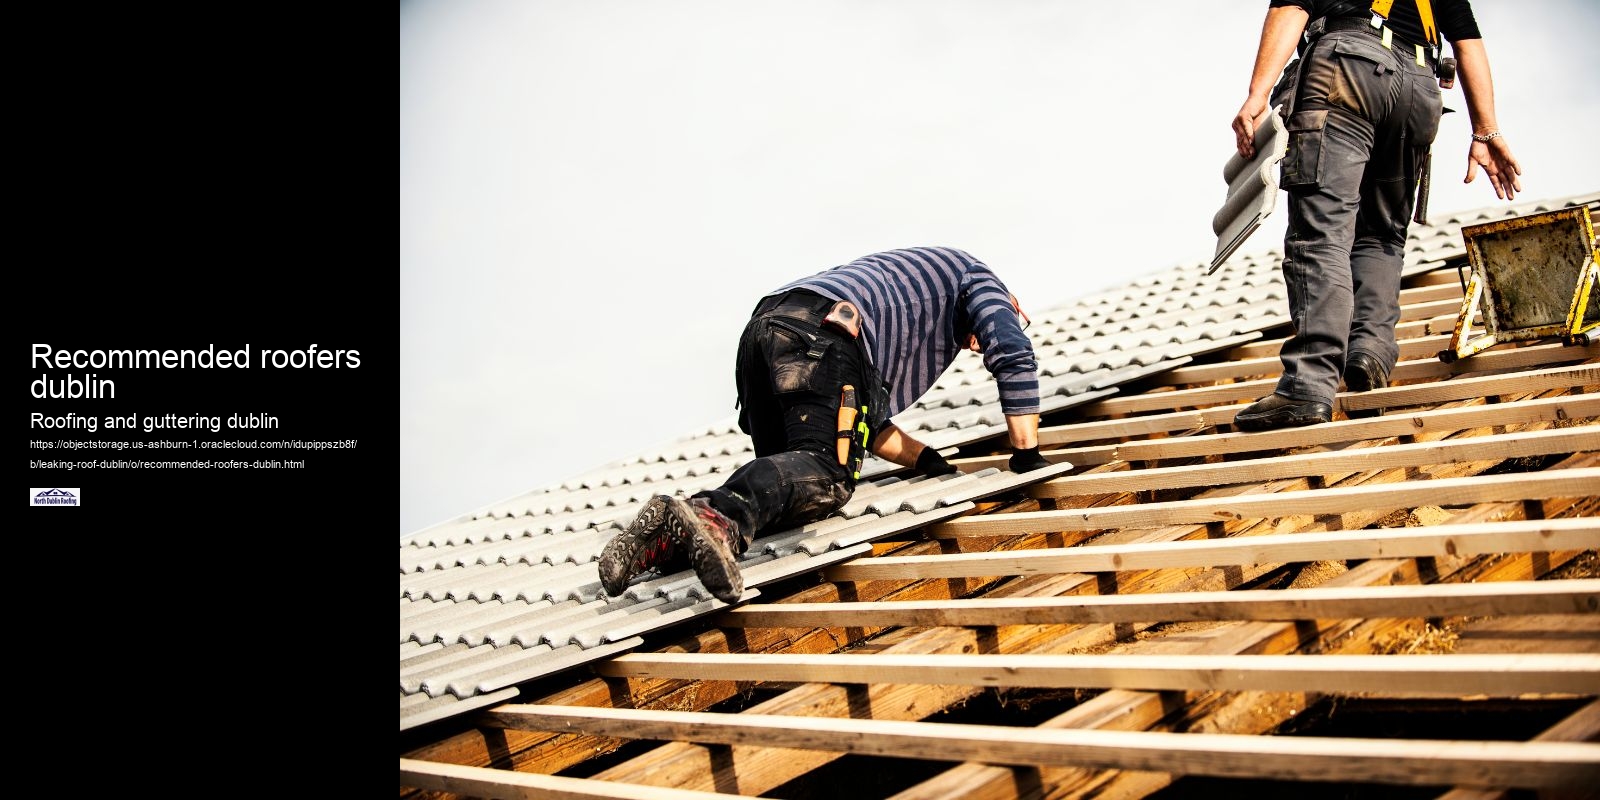 Recommended roofers dublin